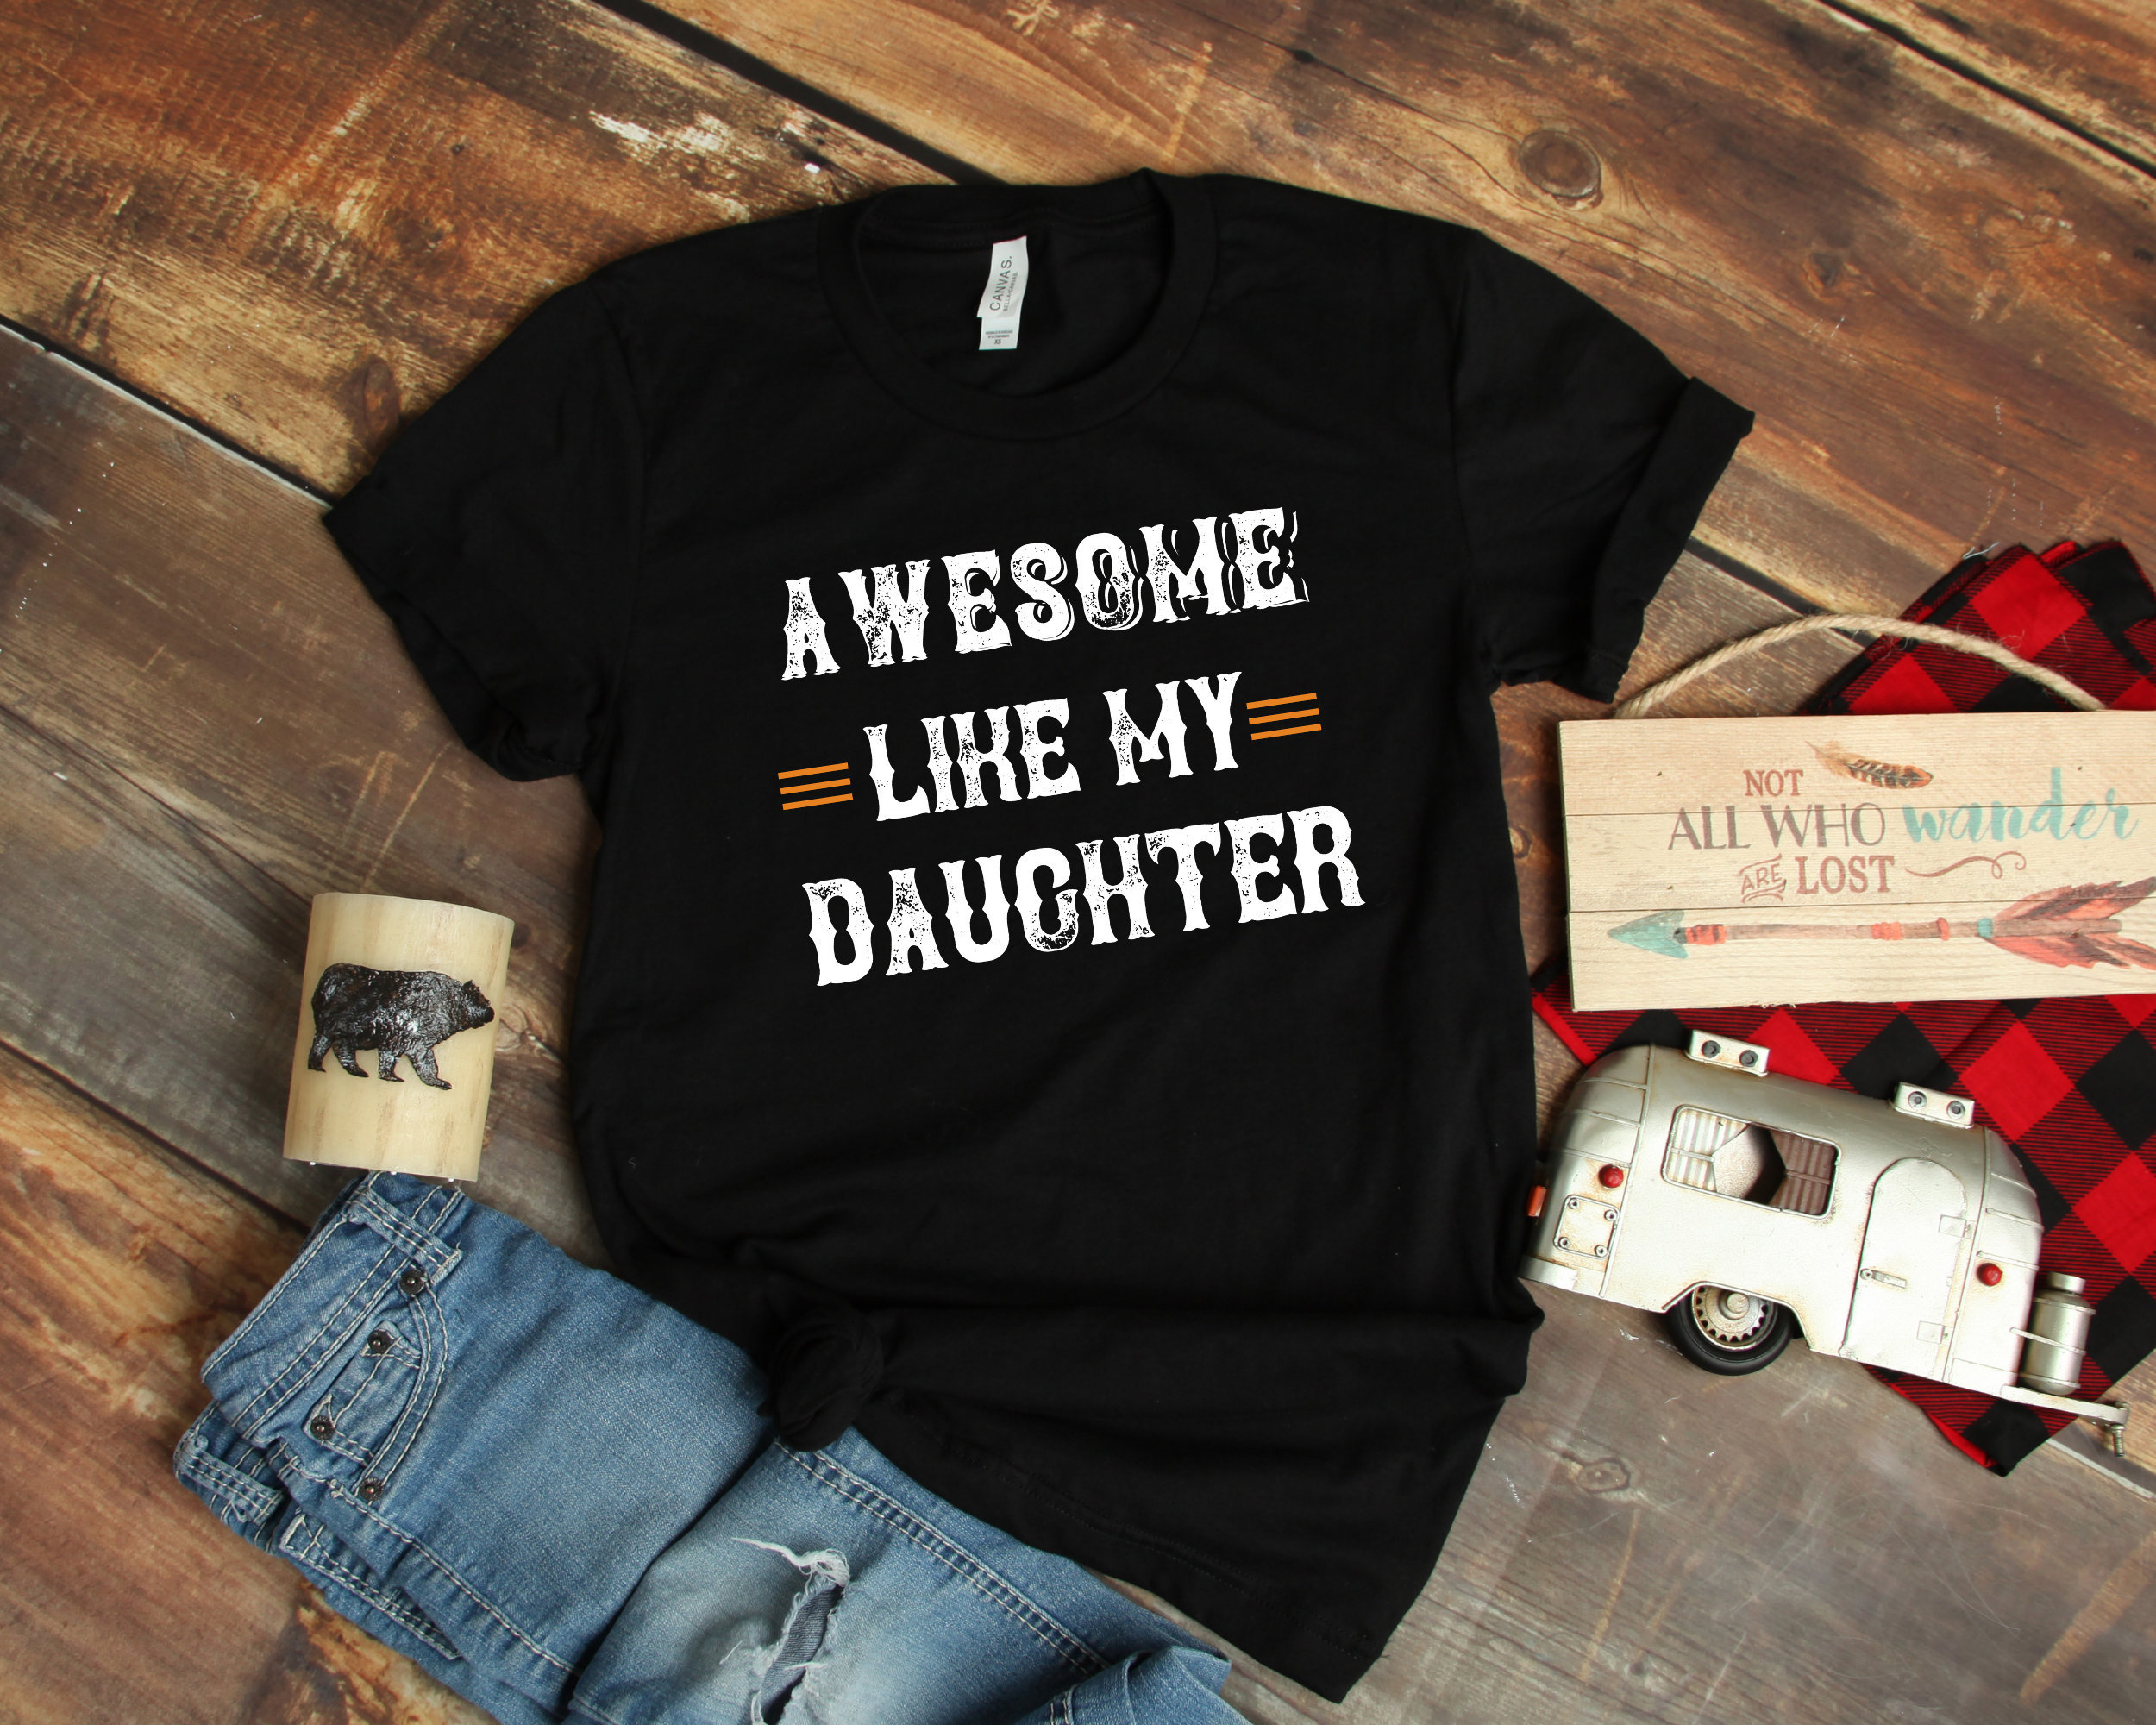 Awesome Like My Daughter Shirt Unisex Tshirt Gift for Dad | Etsy